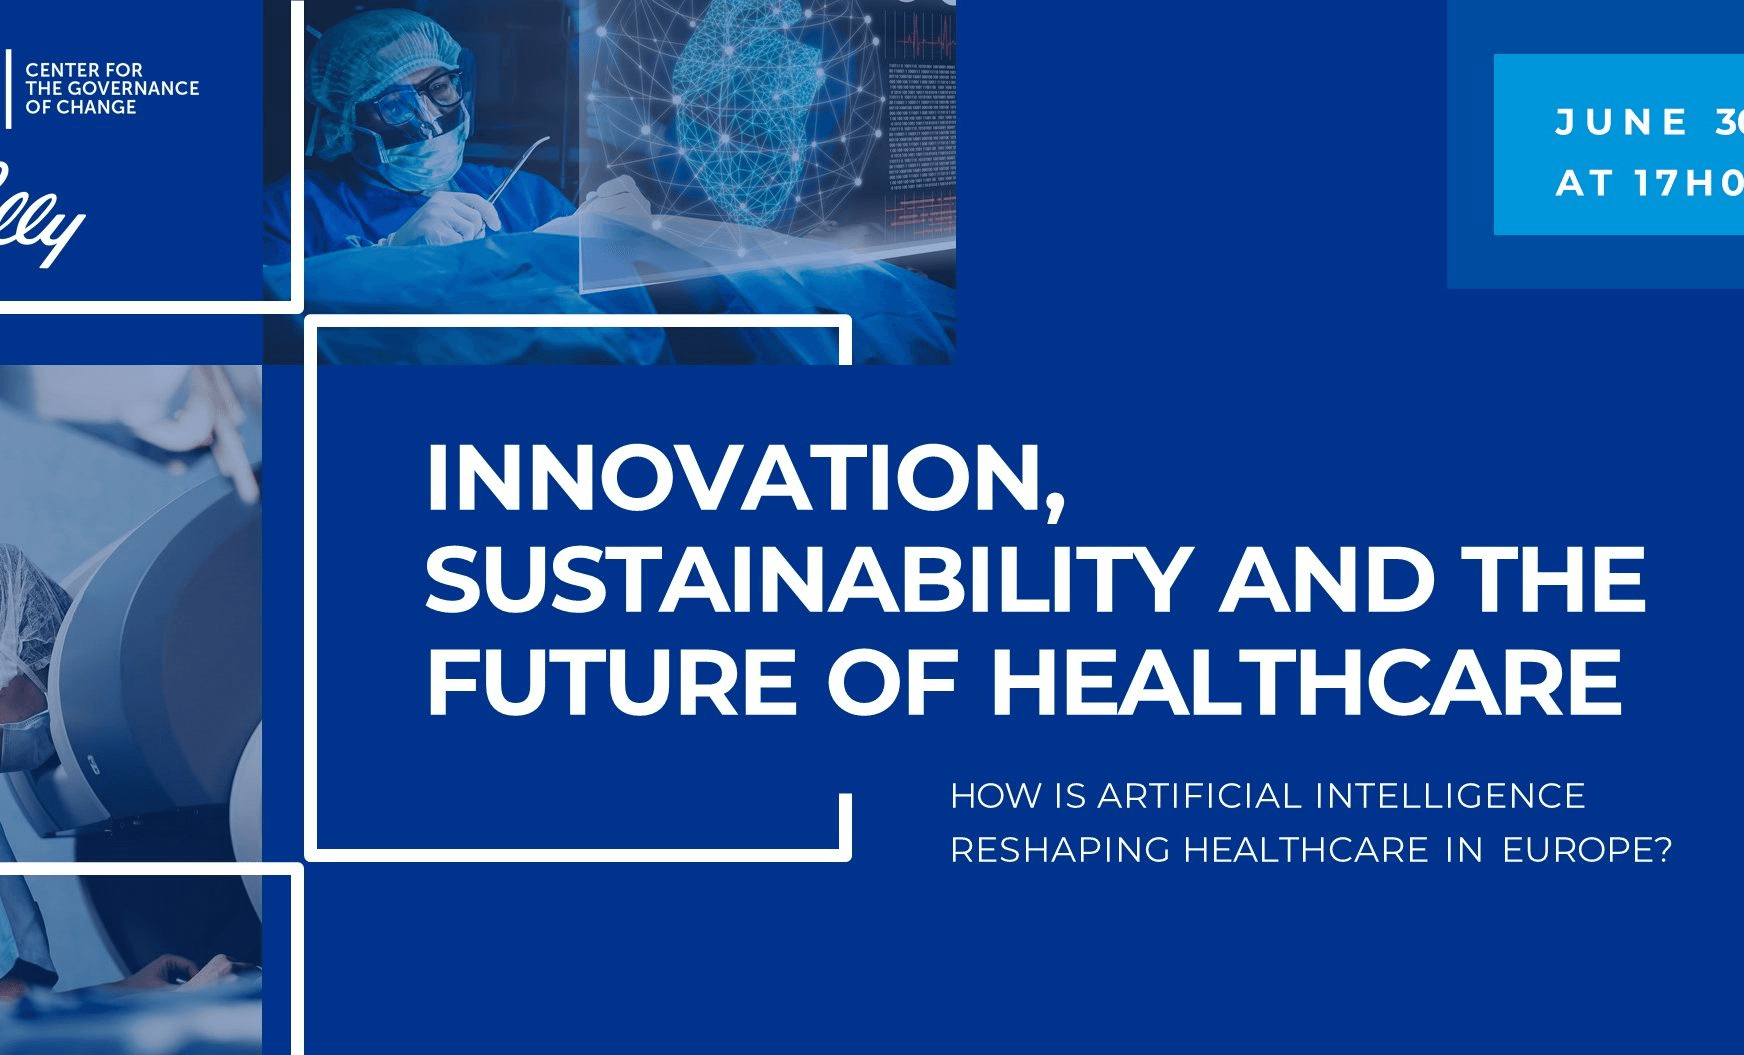 A promotional image for a healthcare event, focusing on innovation, sustainability, and the future of healthcare with references to artificial intelligence.